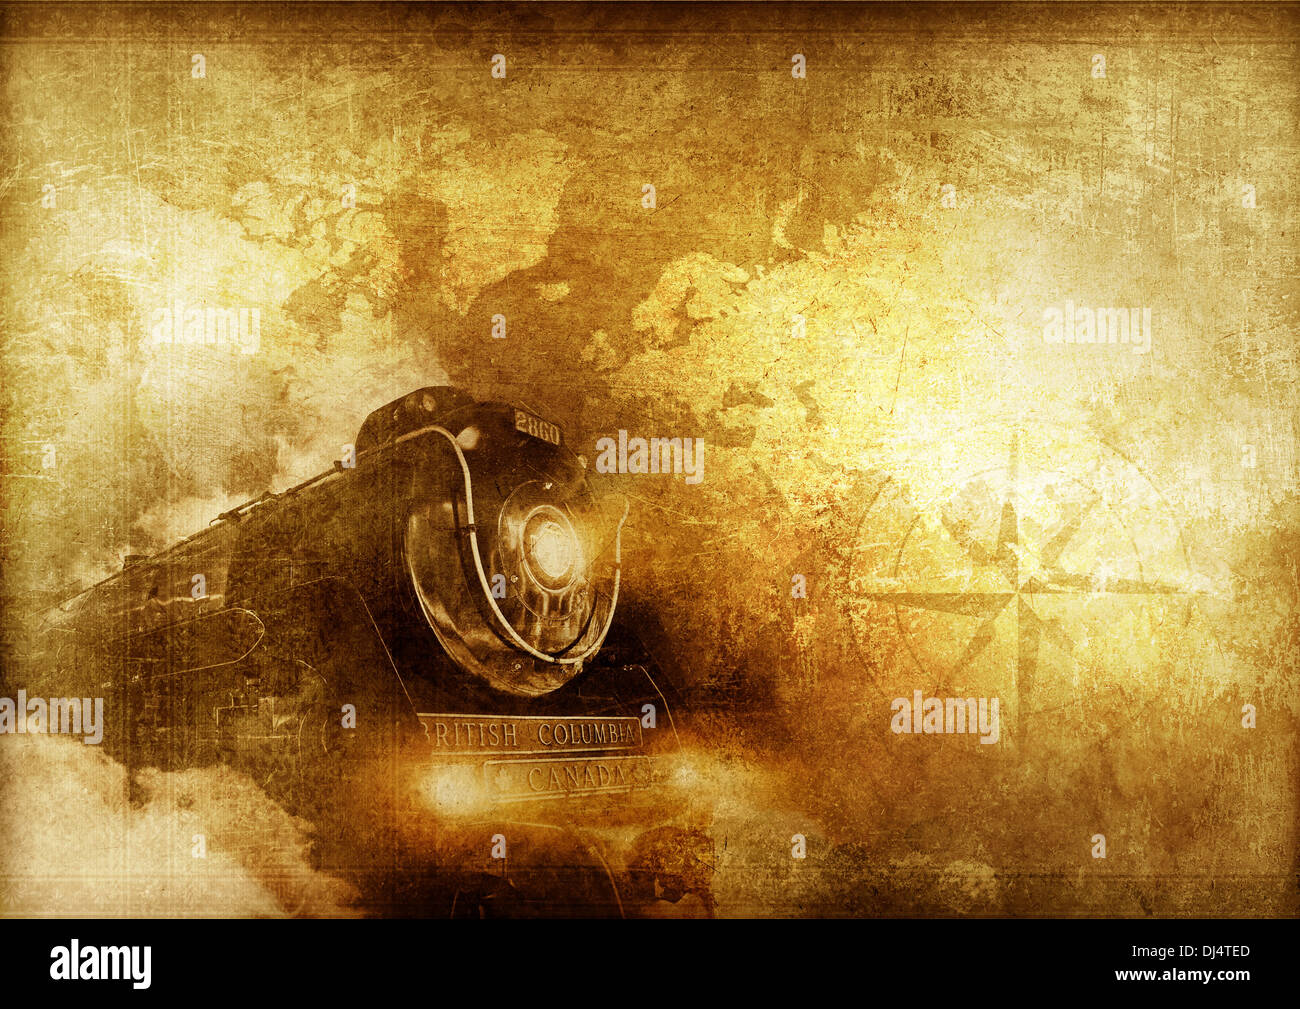 Vintage Travelers - Vintage Journey Background with Steam Locomotive, World  Map and Compass Rose. Vintage Backgrounds Collection Stock Photo - Alamy